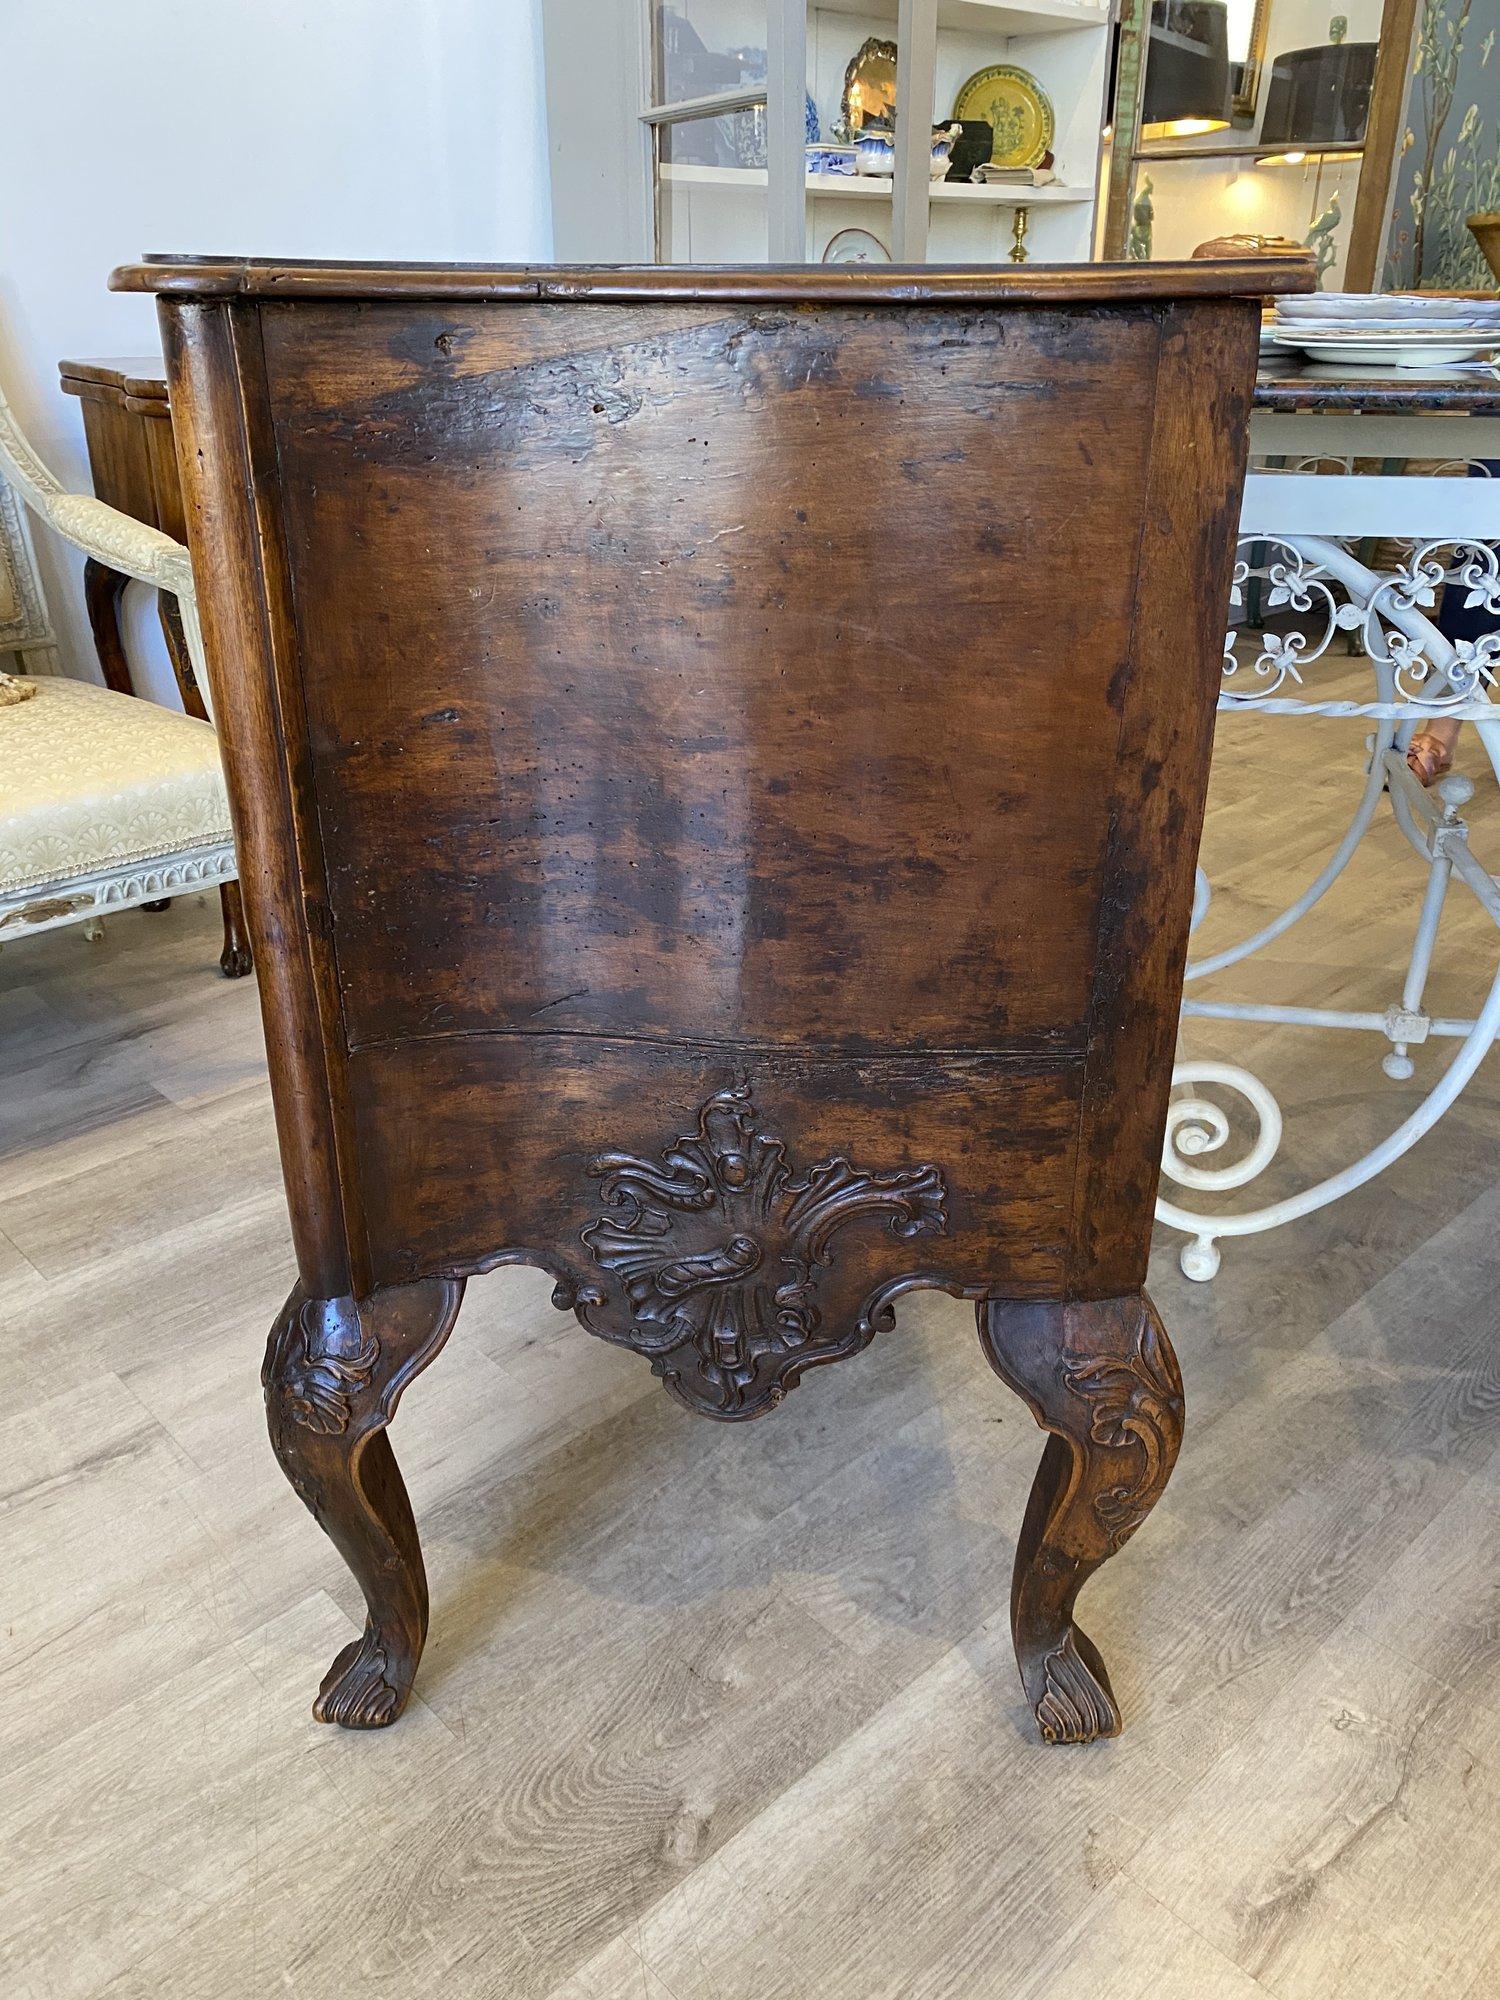 Carved Portuguese Walnut Commode, 18th Century, Fine Carving